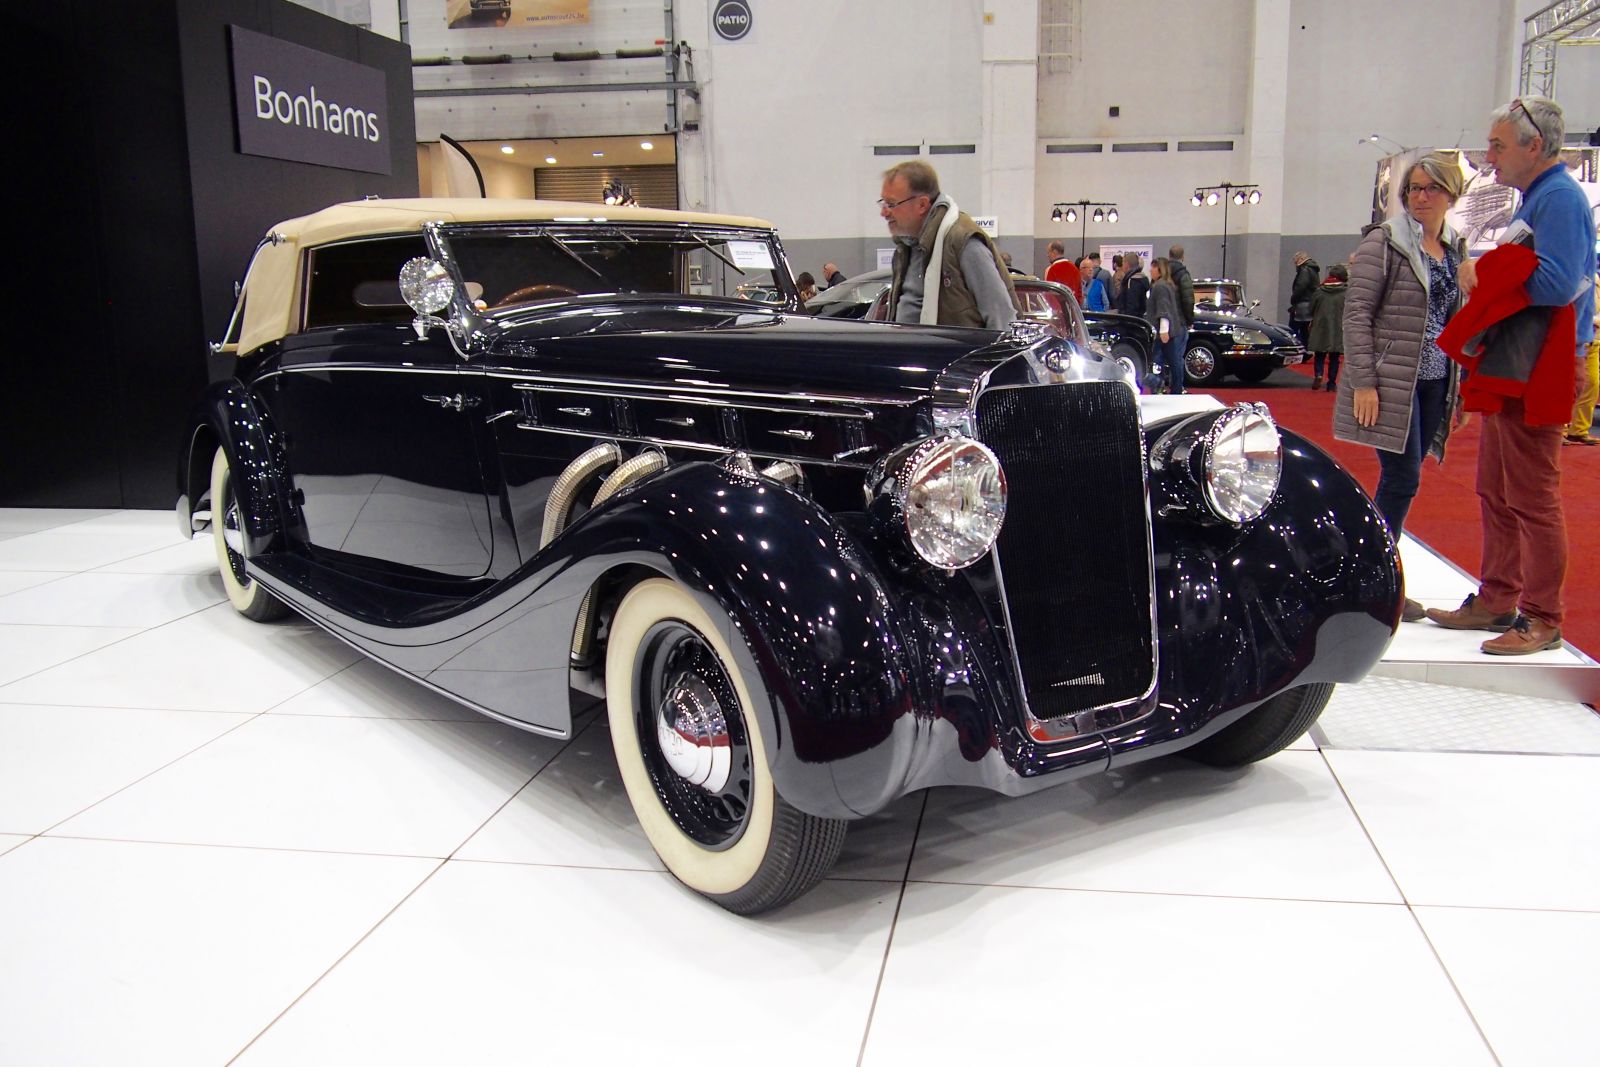 1937 Delage D8-120 Cabriolet with coachwork by Chapron.